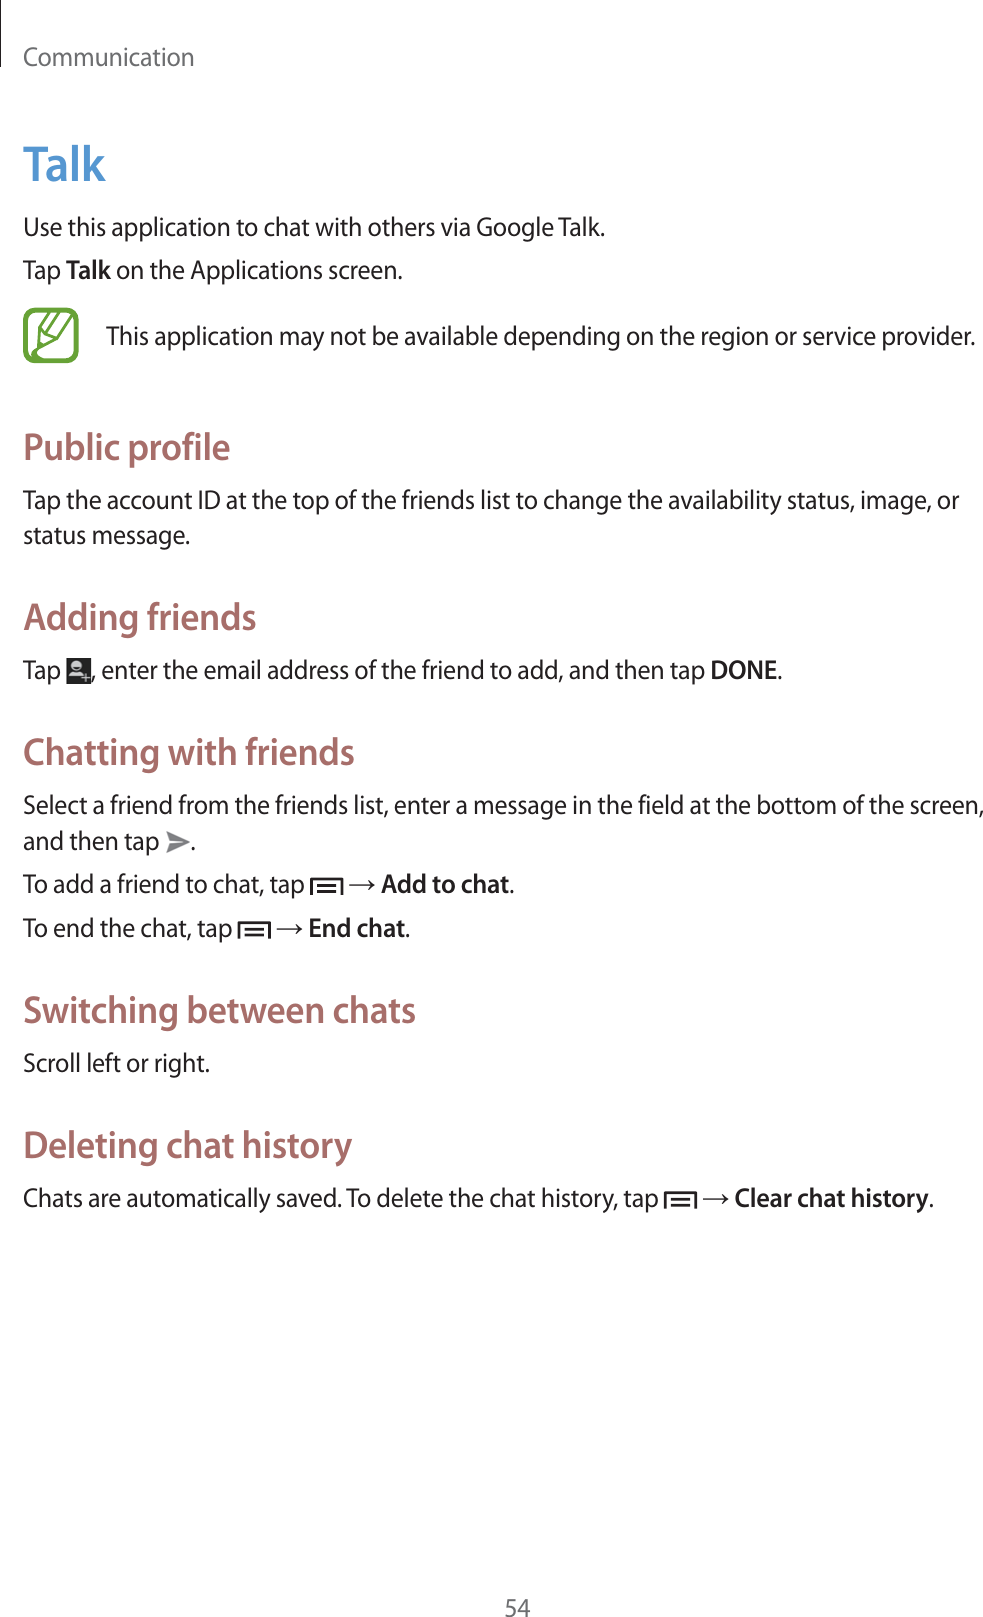 Communication54TalkUse this application to chat with others via Google Talk.Tap Talk on the Applications screen.This application may not be available depending on the region or service provider.Public profileTap the account ID at the top of the friends list to change the availability status, image, or status message.Adding friendsTap  , enter the email address of the friend to add, and then tap DONE.Chatting with friendsSelect a friend from the friends list, enter a message in the field at the bottom of the screen, and then tap  .To add a friend to chat, tap   ĺ Add to chat.To end the chat, tap   ĺ End chat.Switching between chatsScroll left or right.Deleting chat historyChats are automatically saved. To delete the chat history, tap   ĺ Clear chat history.